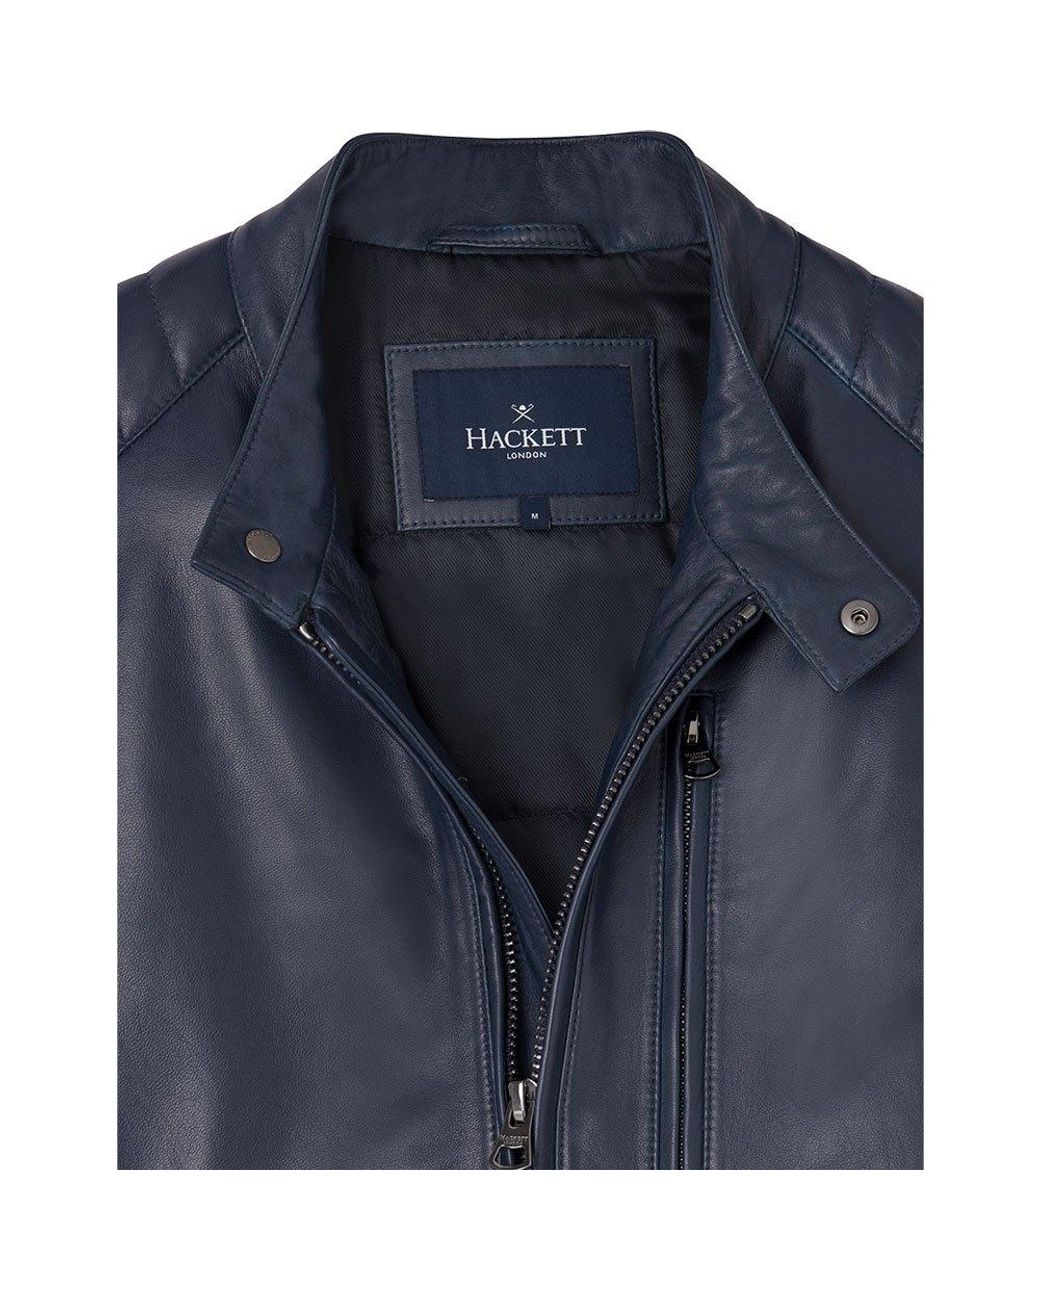 Hackett Navy Suede Leather Jacket - ESD Store fashion, footwear and  accessories - best brands shoes and designer shoes